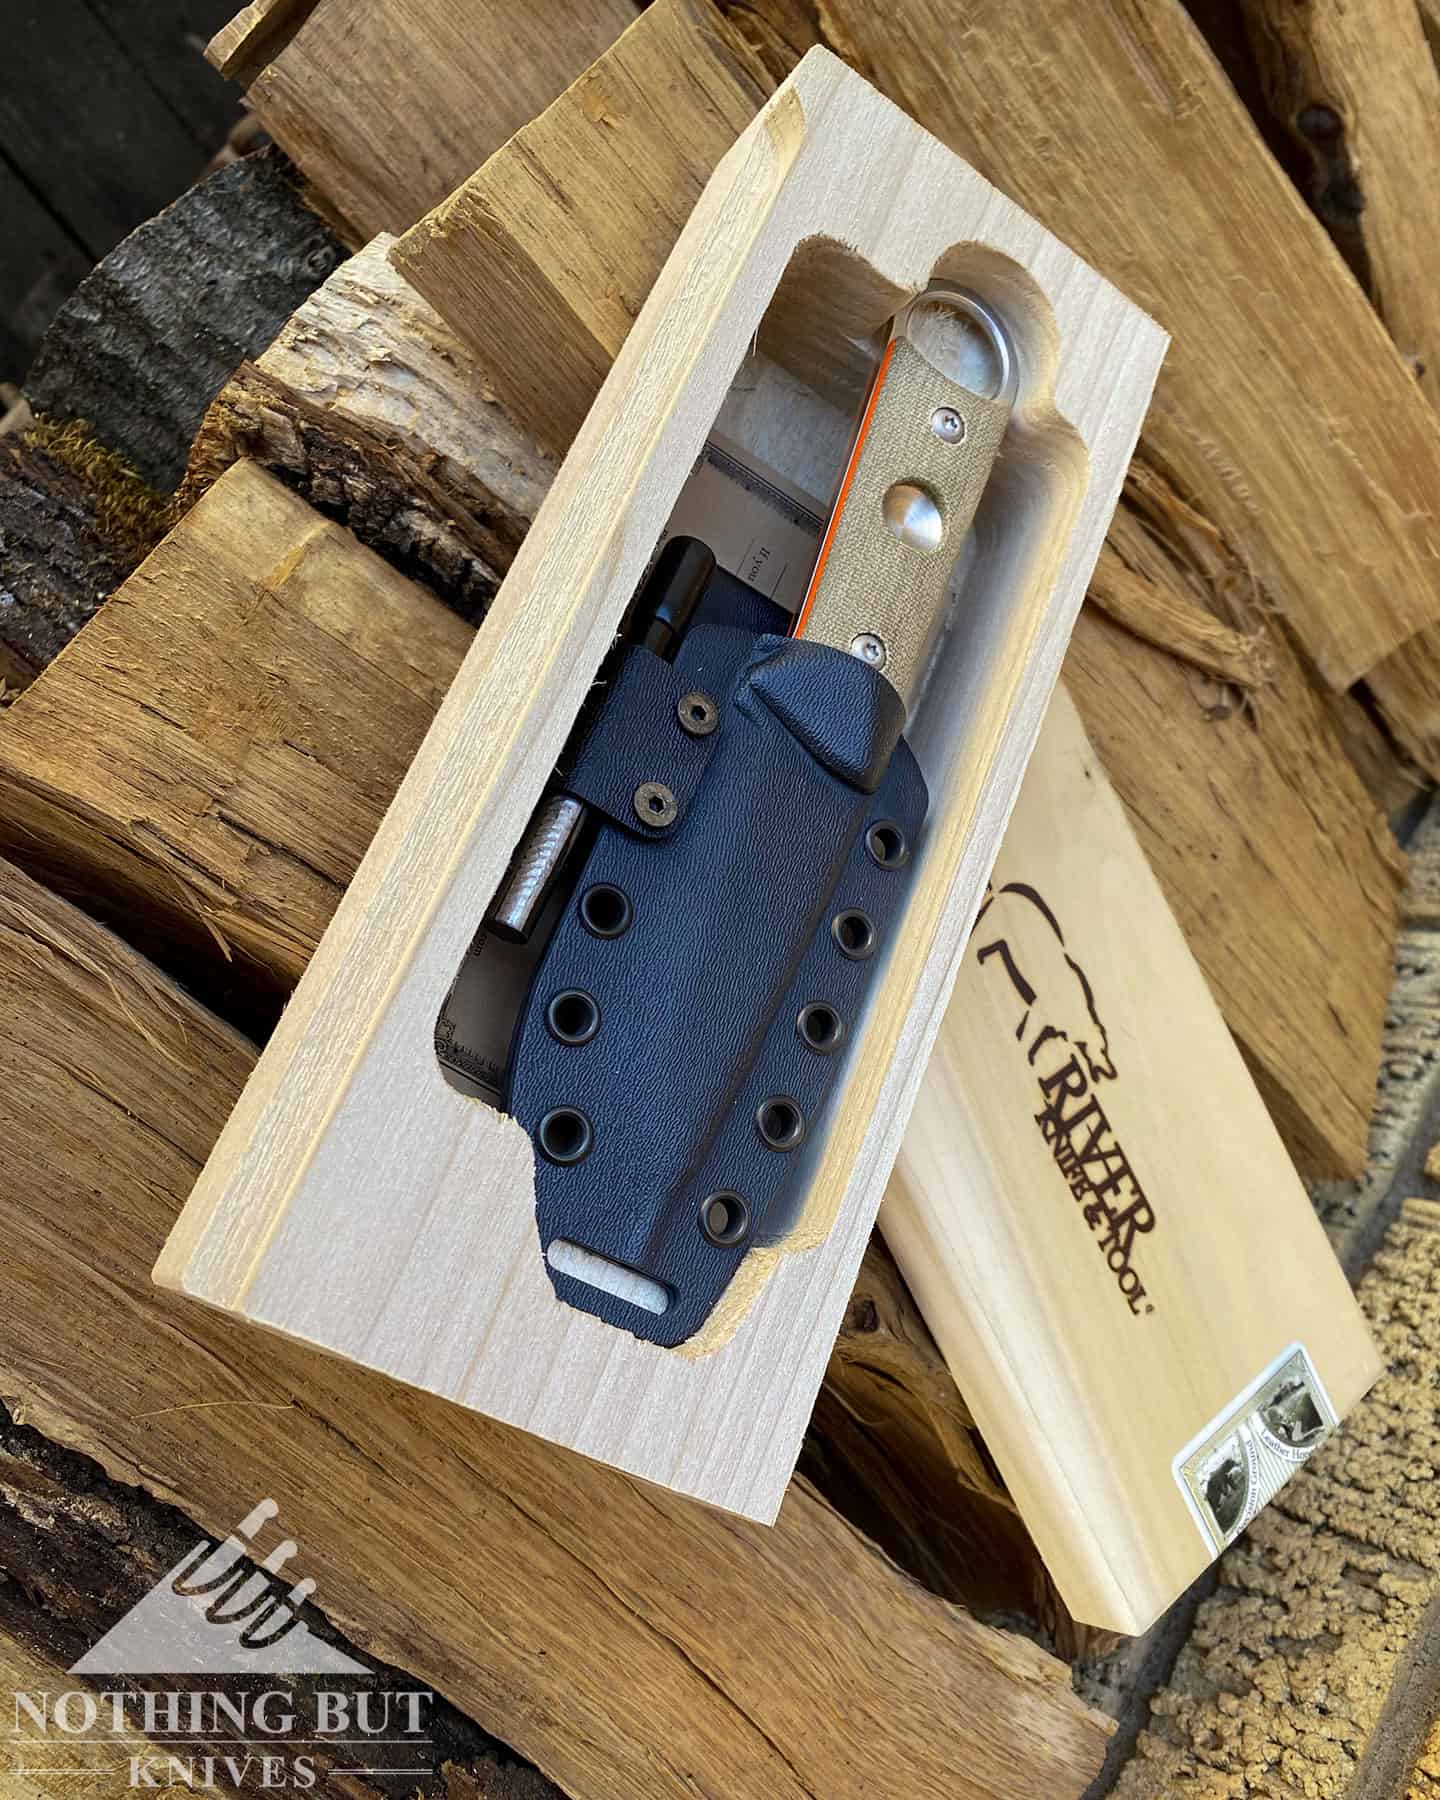 The FIrecraft Puukko ships in a great looking wooden gift box. 